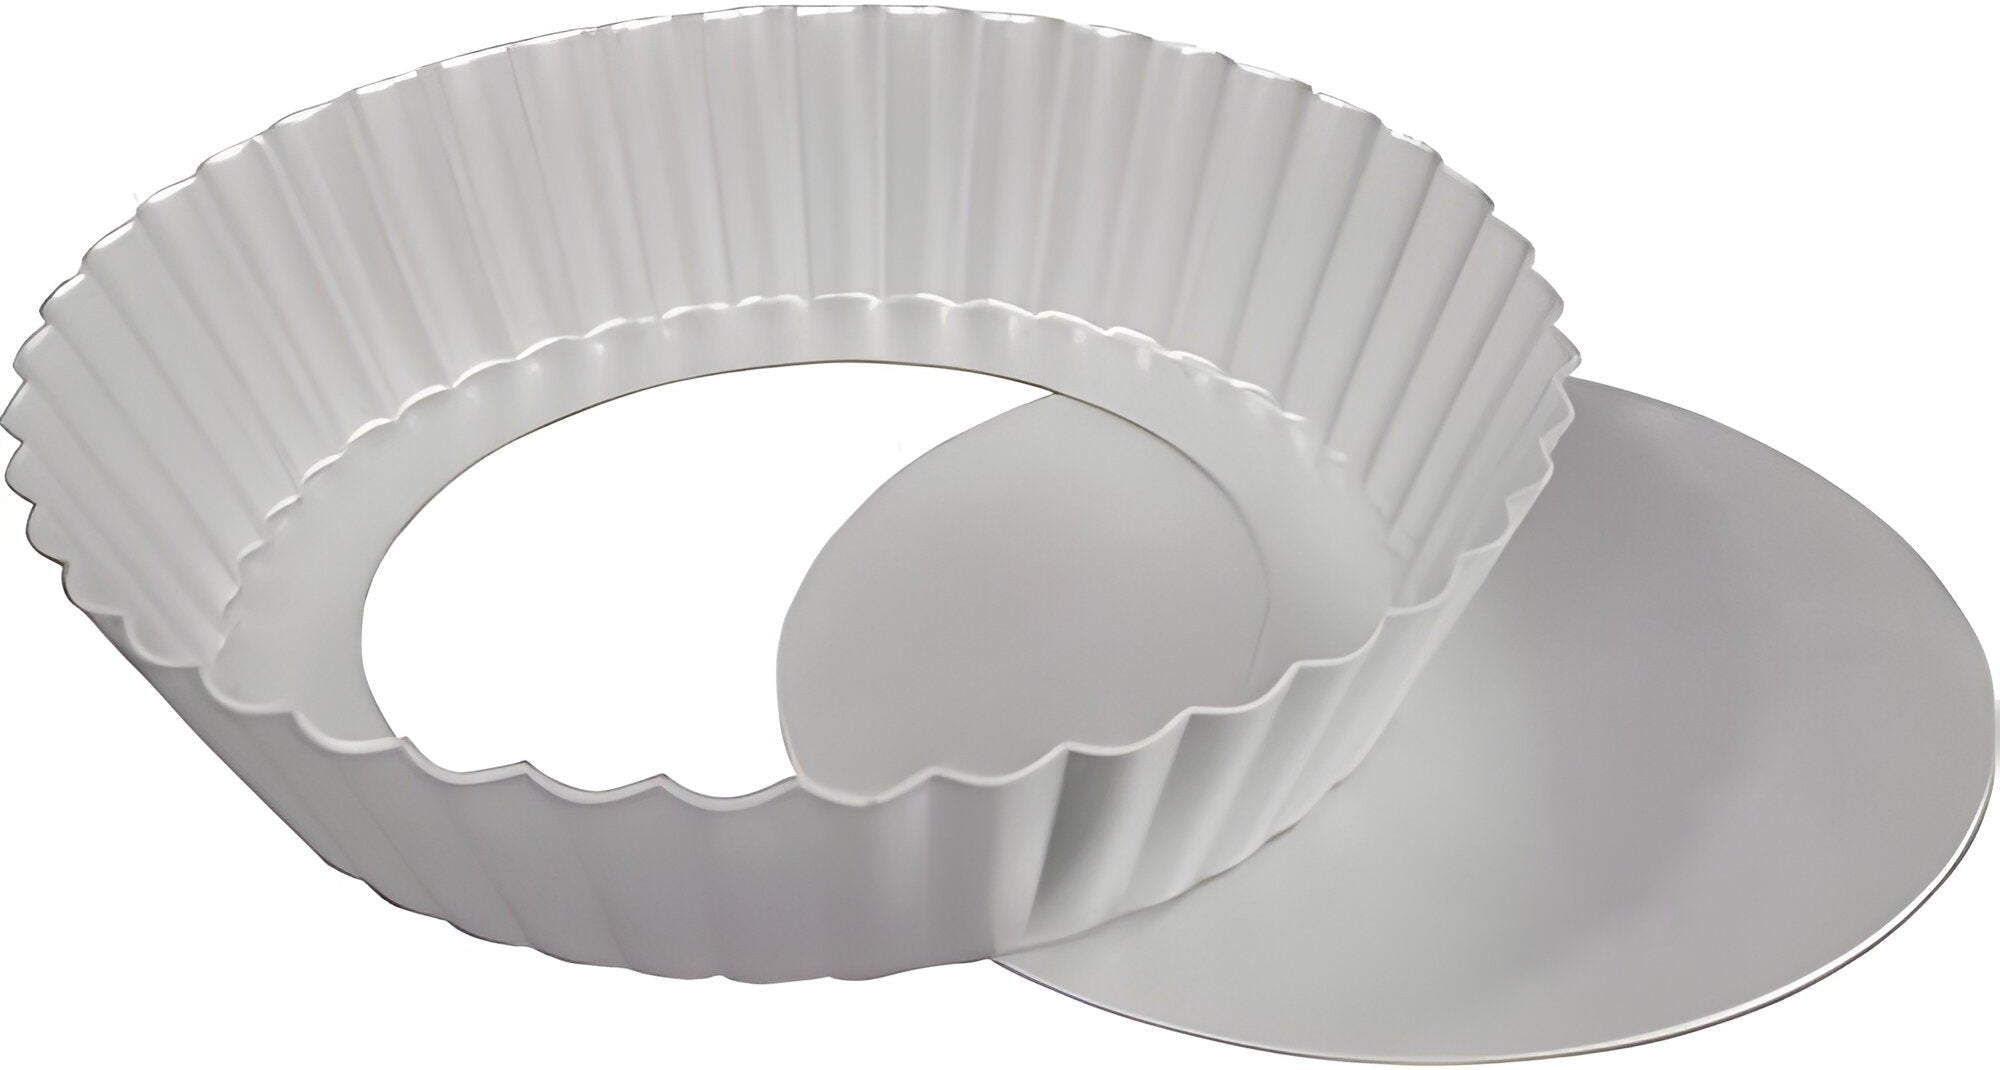 Fat Daddio's - 4.25" X 1" Aluminum Anodized Removable Bottom Fluted Tart Pan - PFT-425